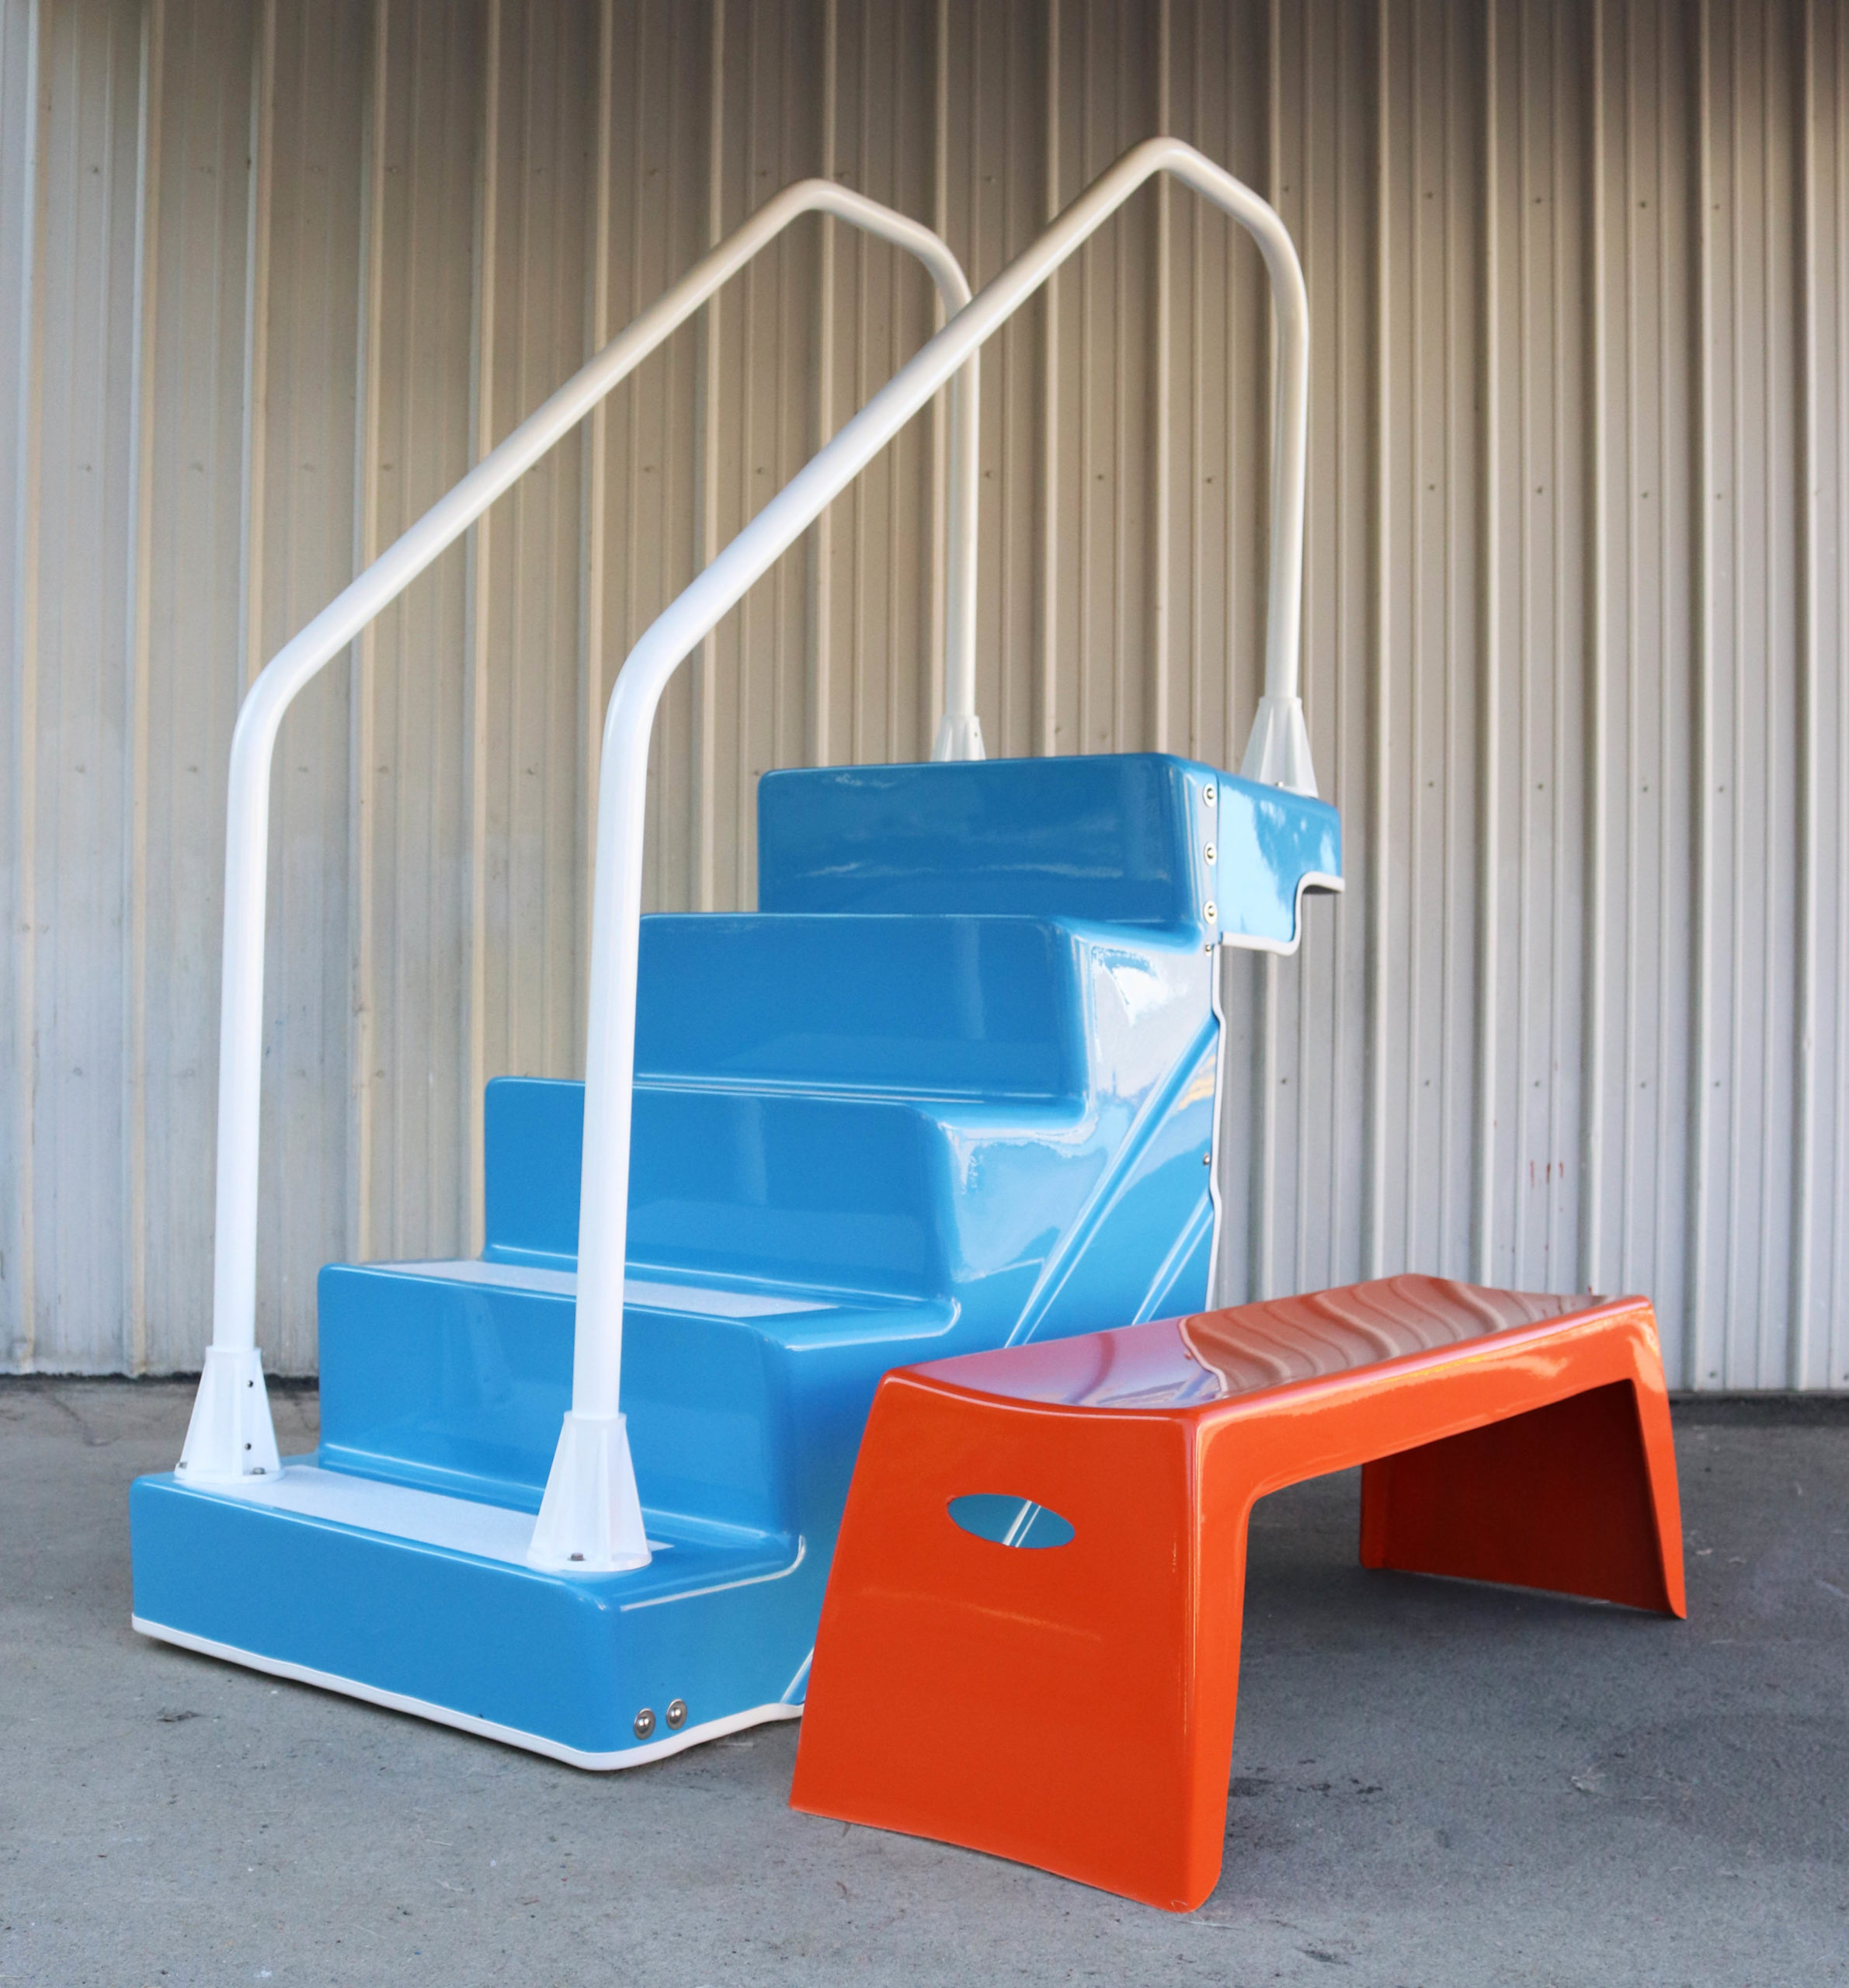 ADA Pool Stairs and 4' Easy Stack Bench in Orange